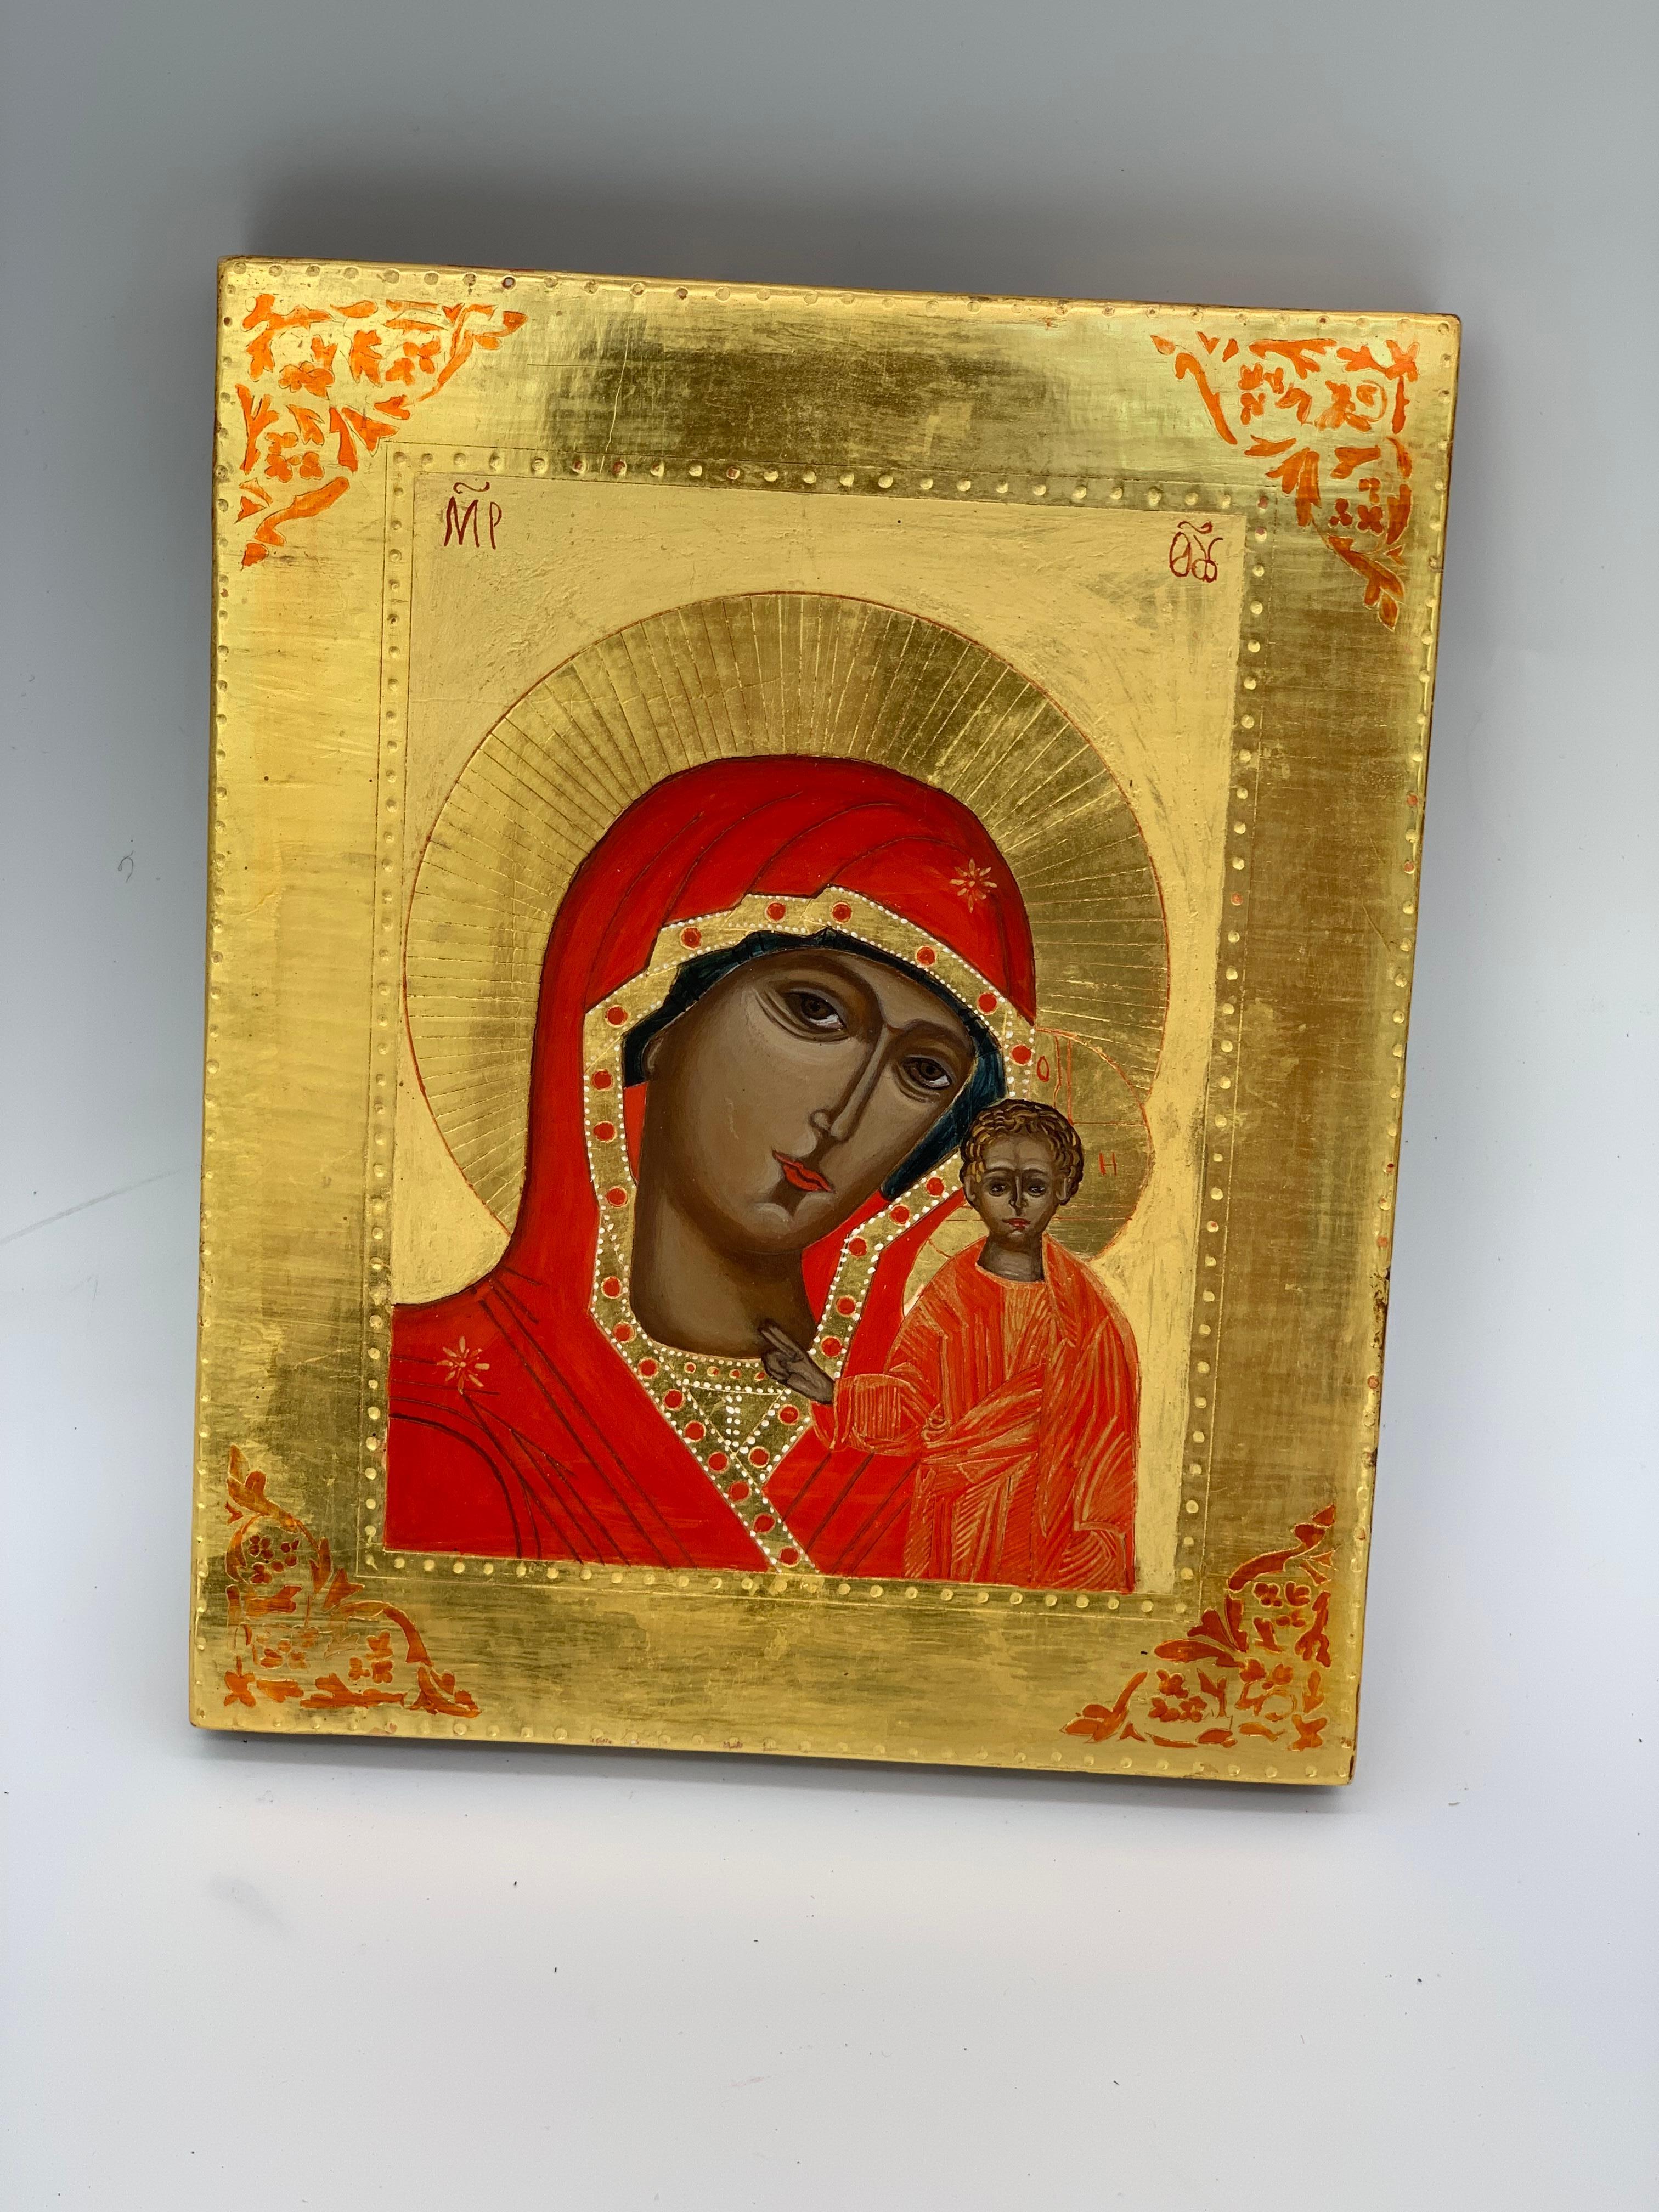 Beautiful Greek icon of Mary mother of god with Jesus next to her. Gold leaf and red details make this a beautiful icon.